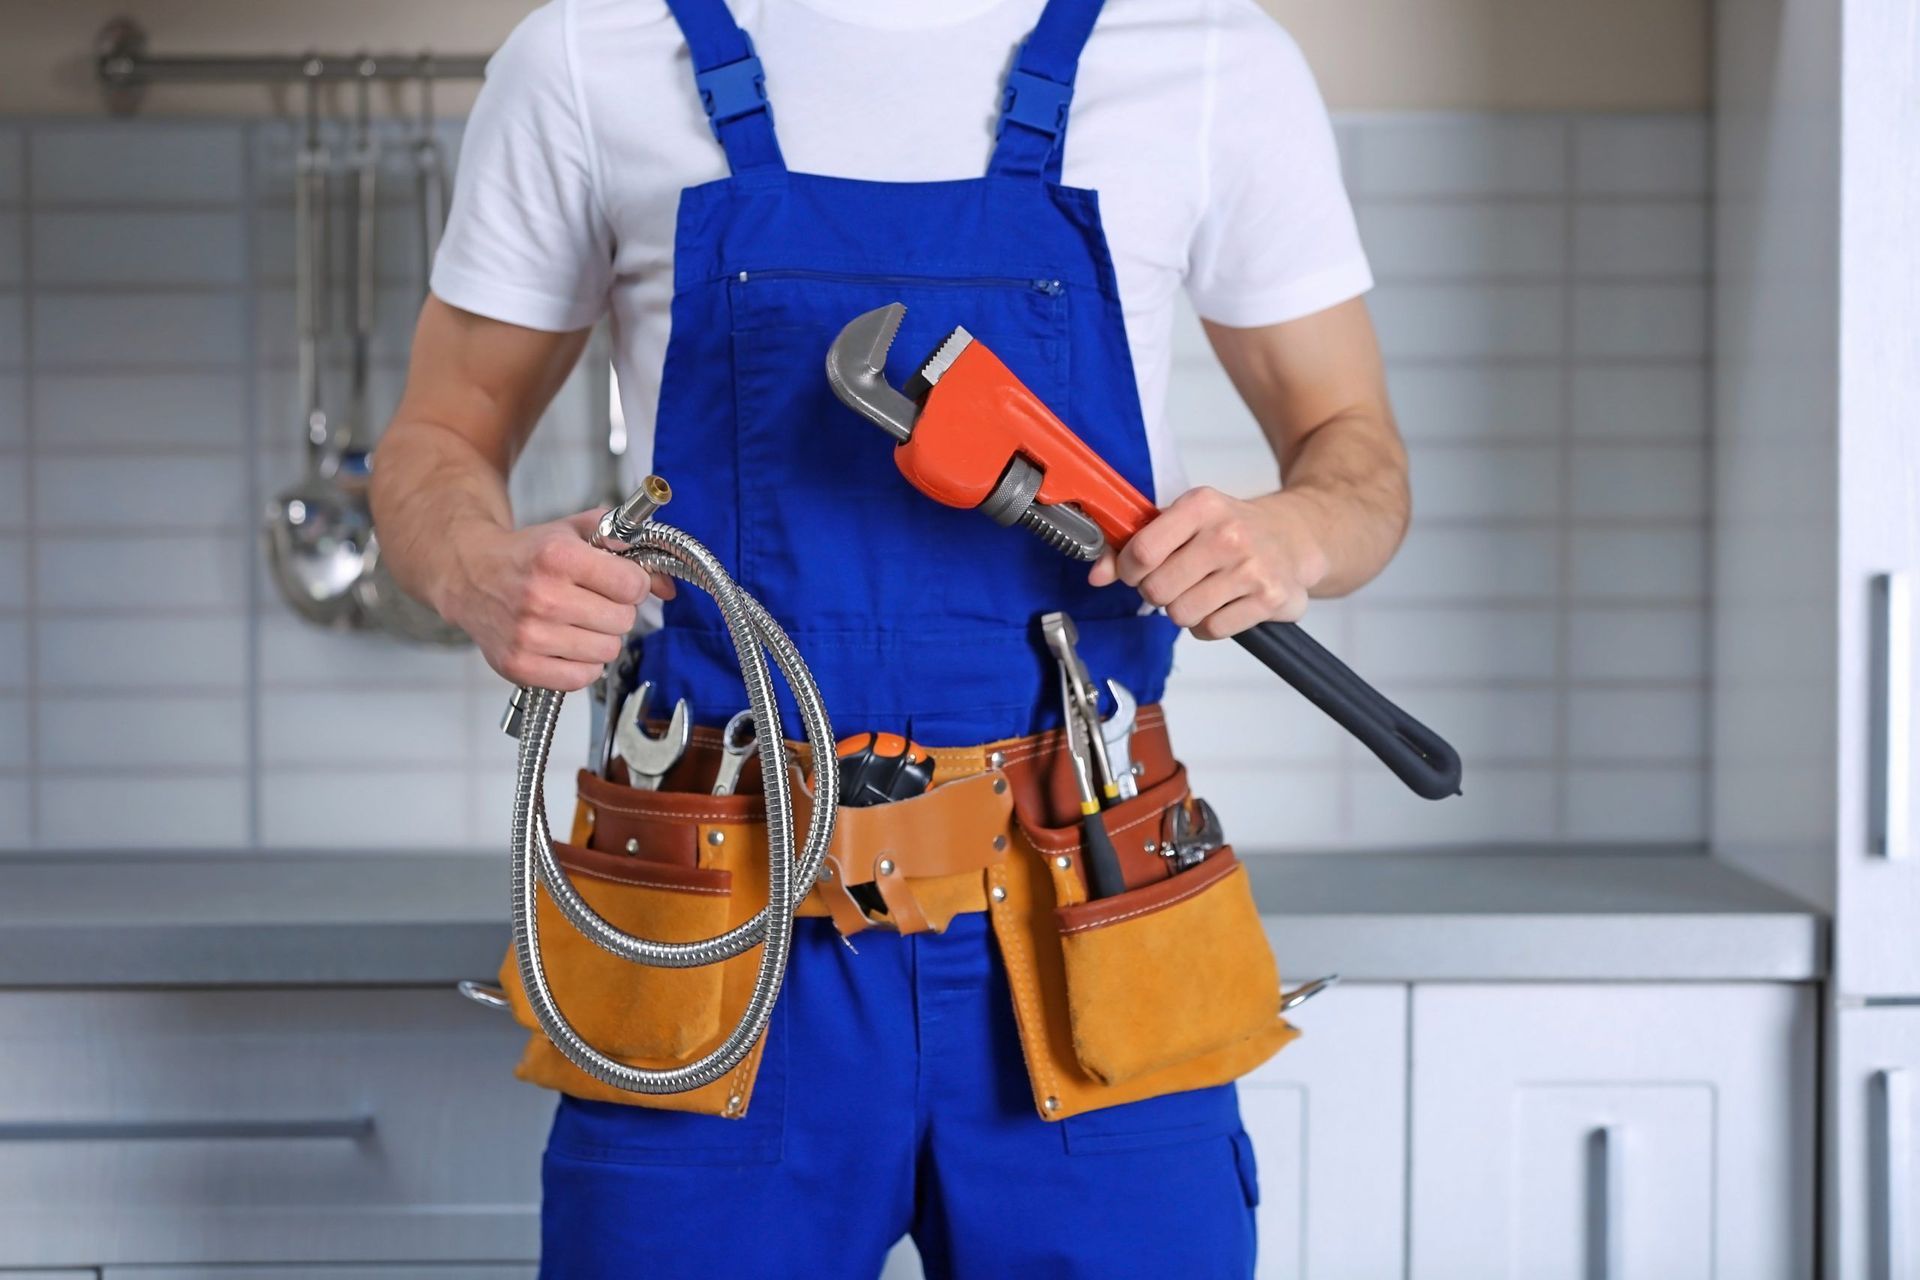 A handyman is holding a wrench and a hose for providing handyman services in NYC.